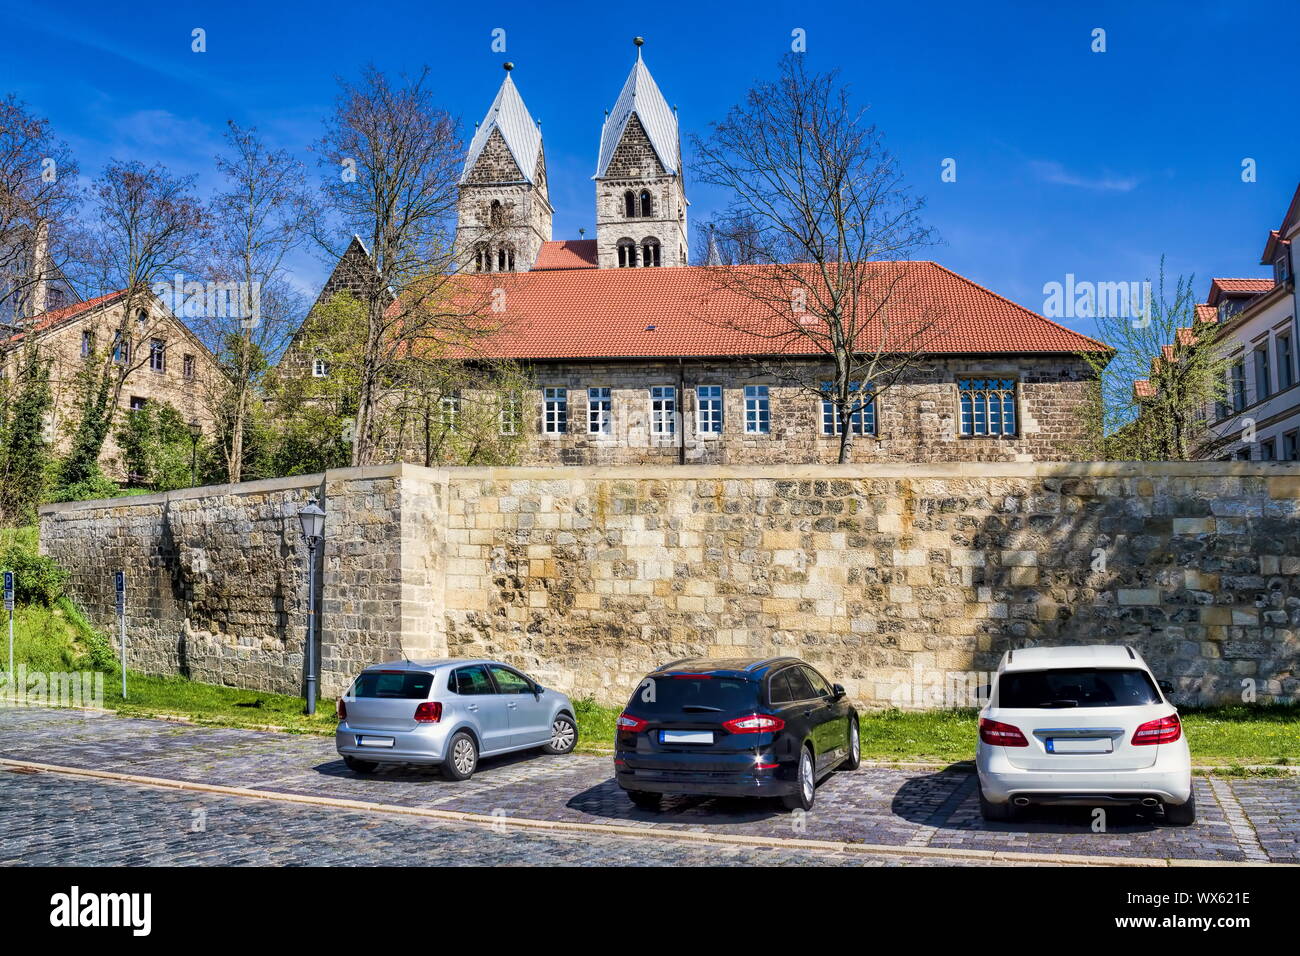 Halberstadt, Church of Our Lady Stock Photo